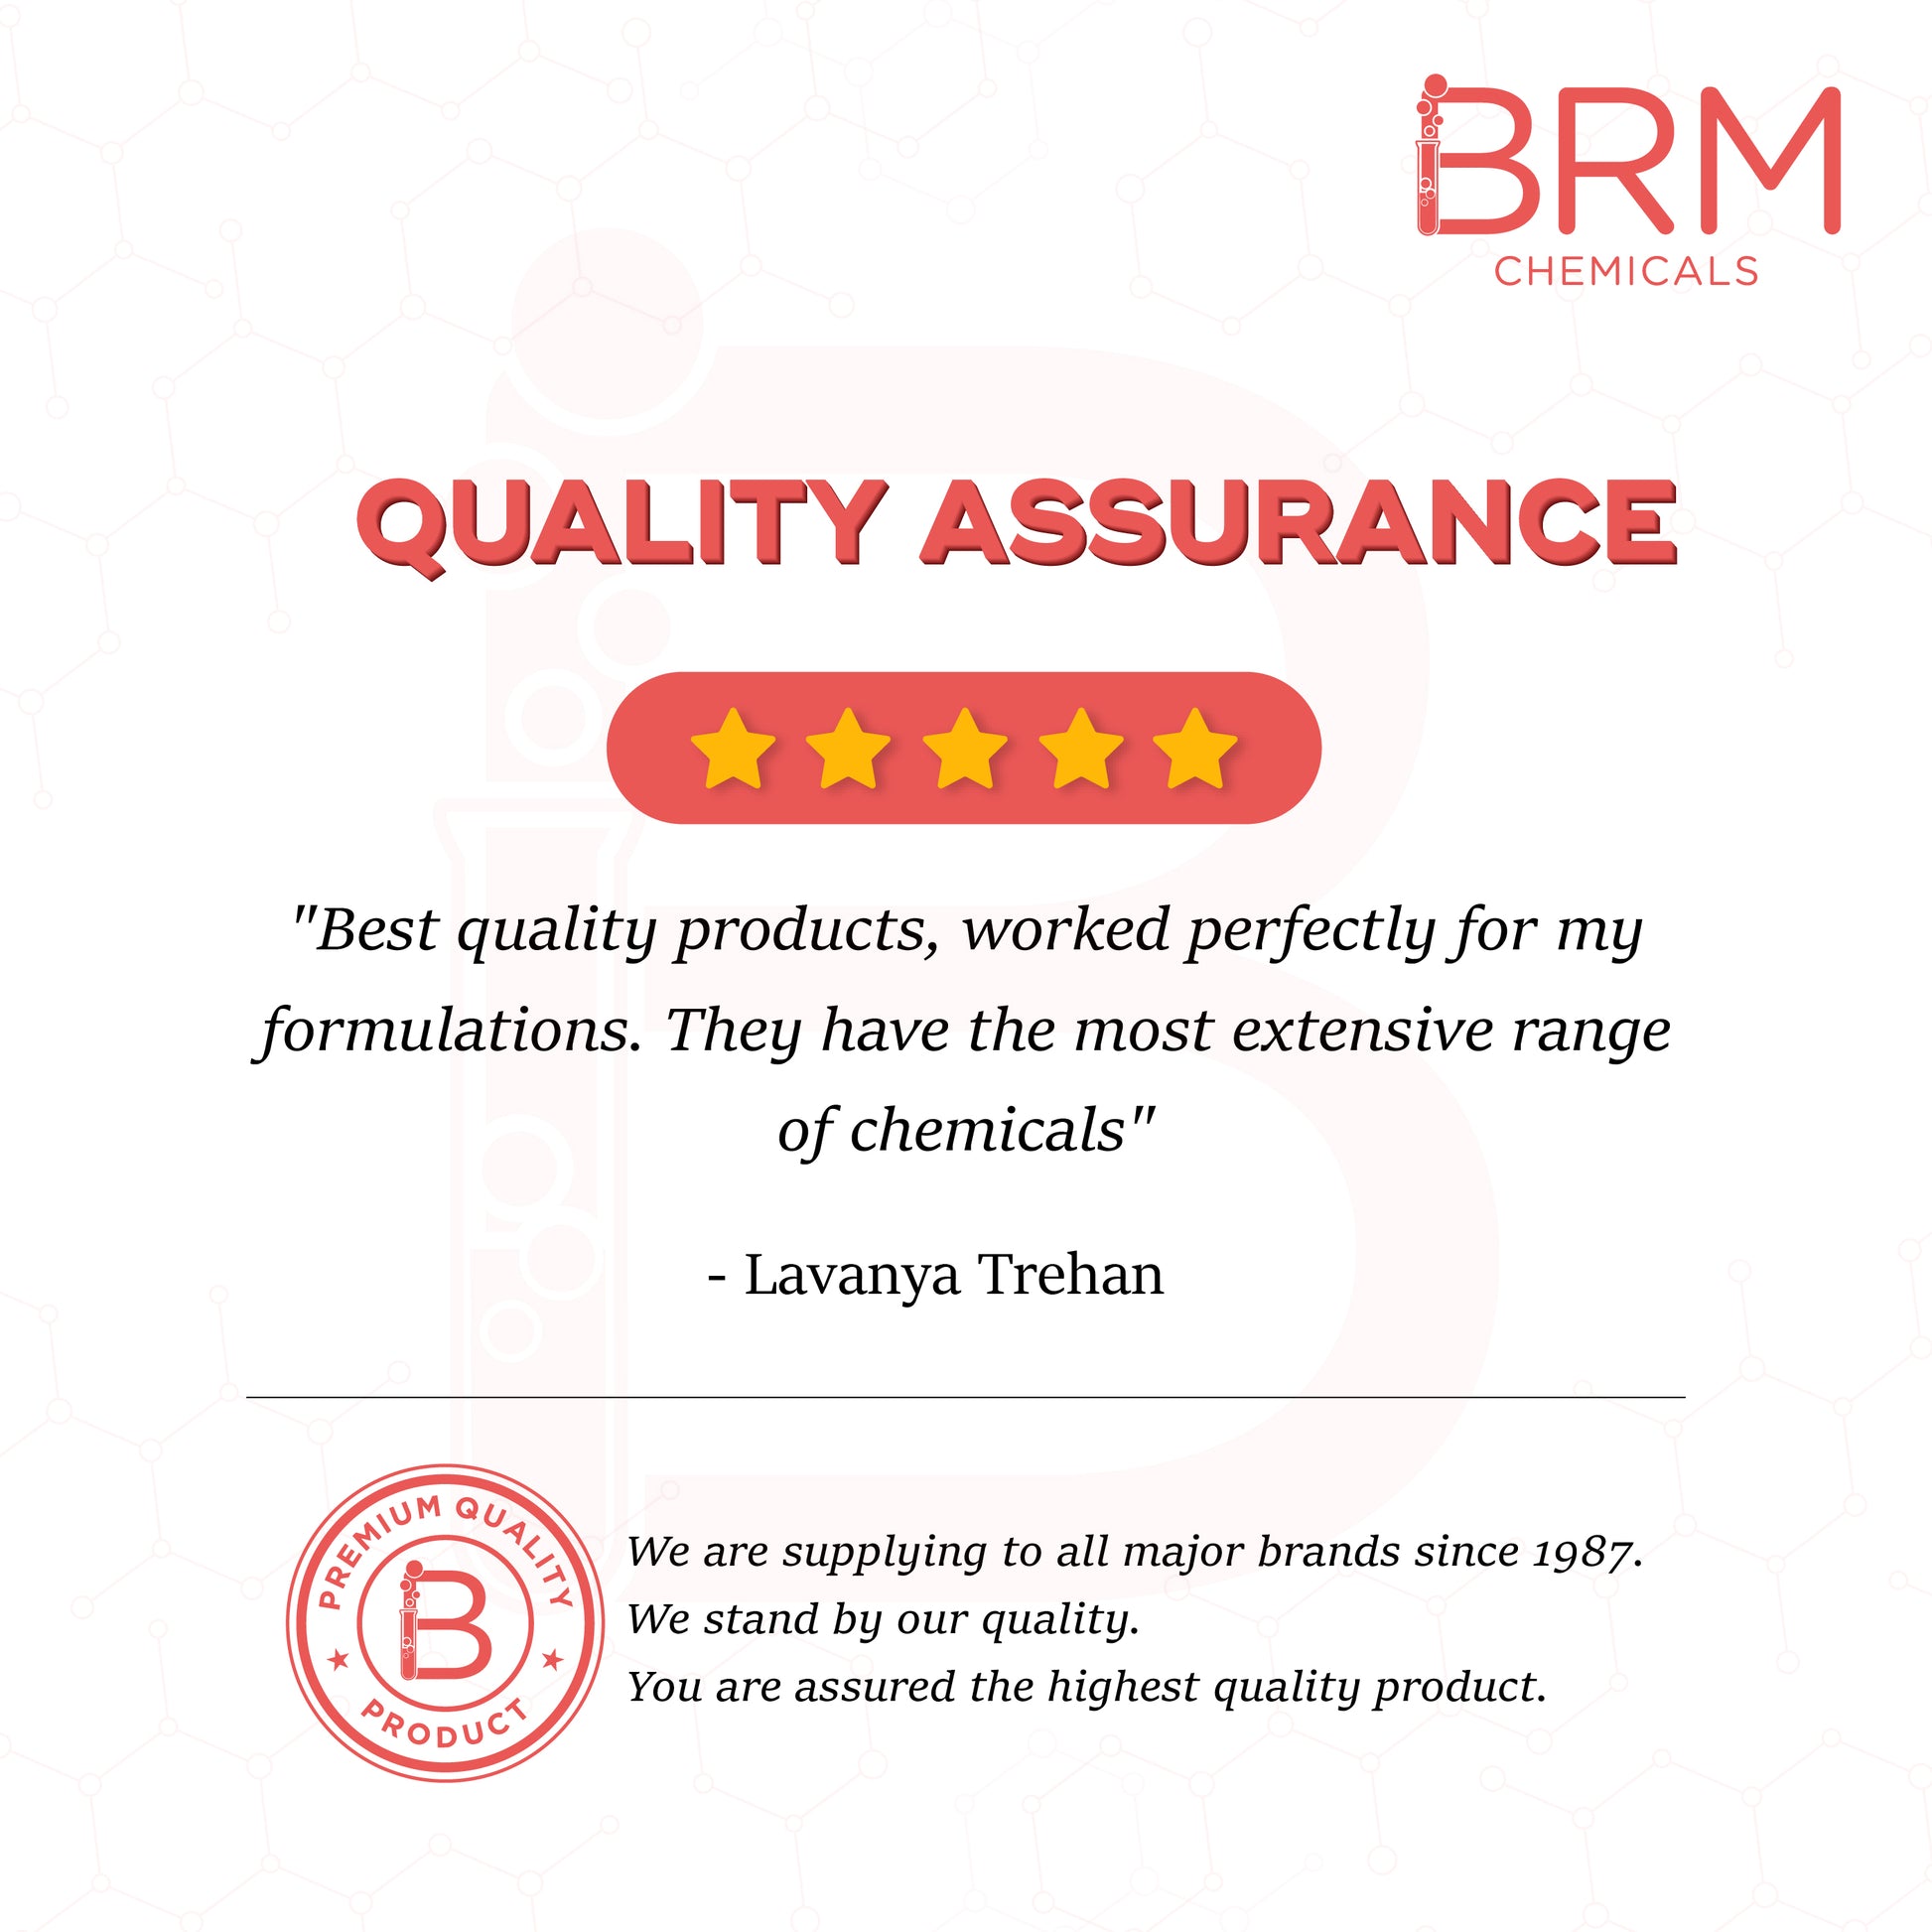 brm chemicals' poster for quality assured products